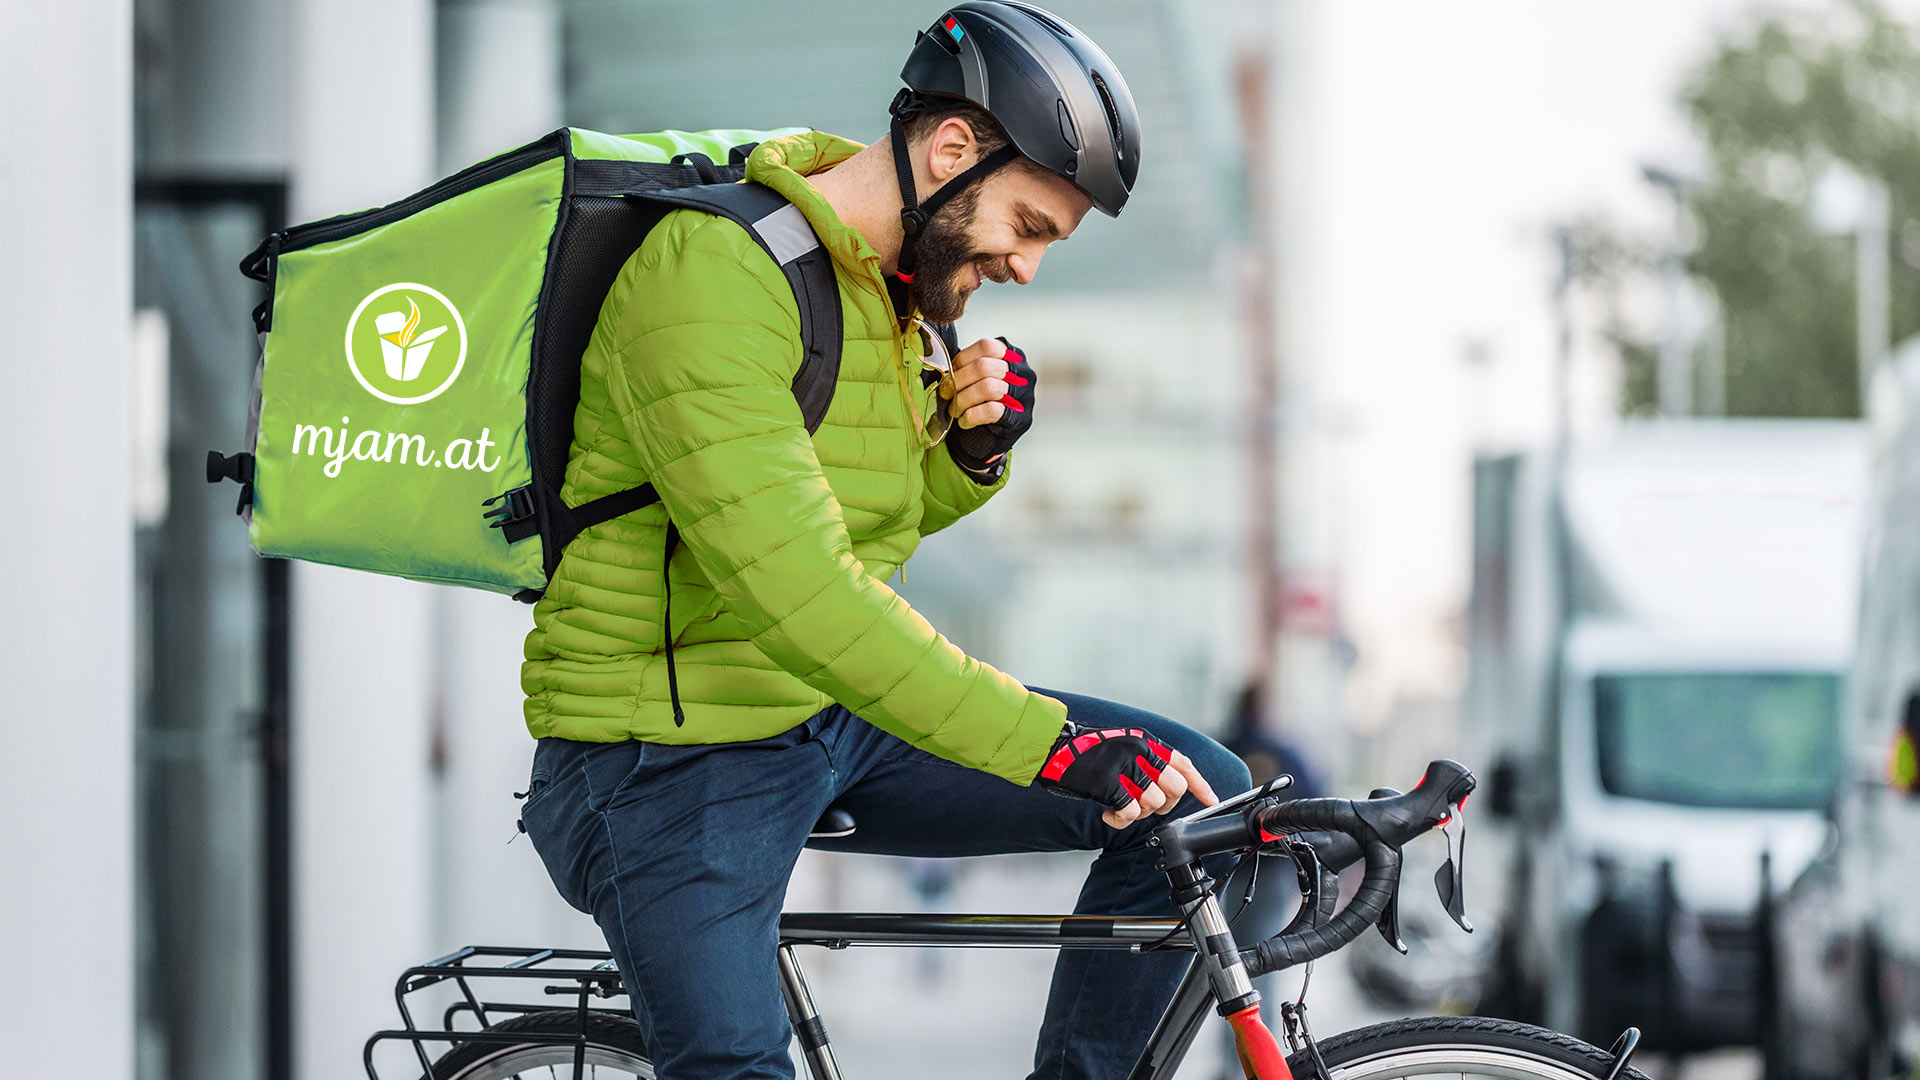 Successful delivery services like Mjam use PowUnity's BikeTrax GPS tracker for their e-bike fleet management.